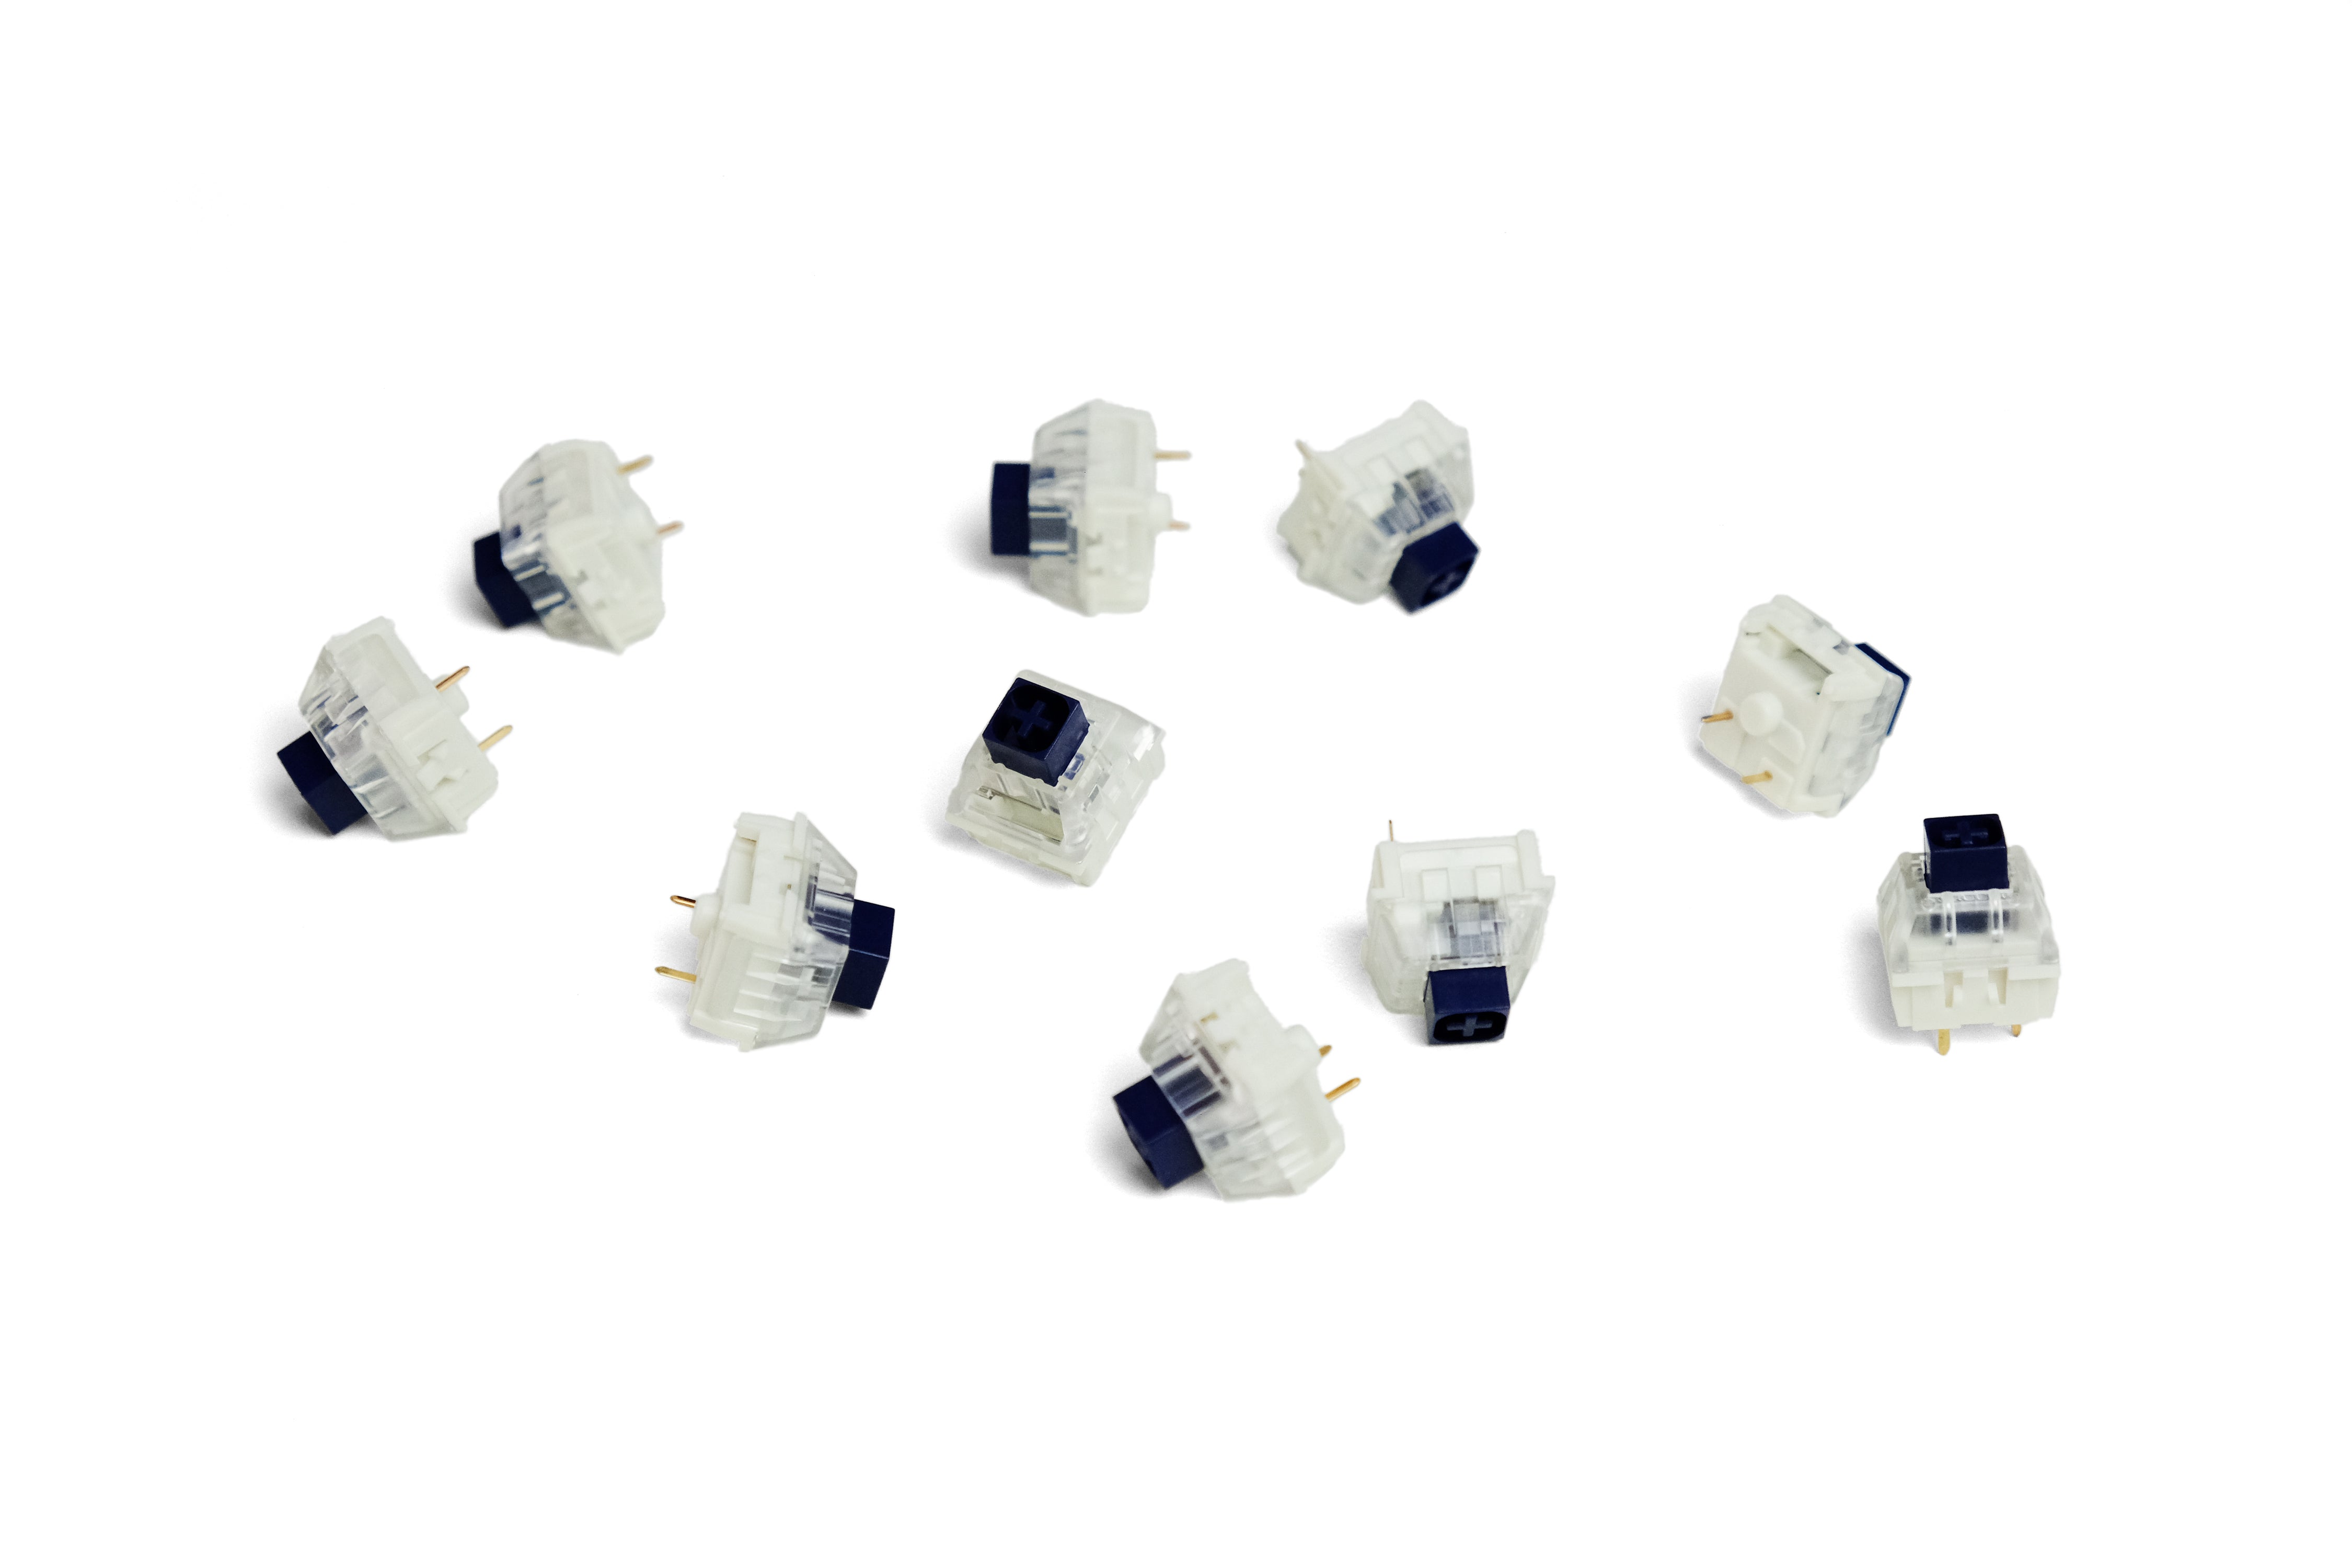 Group of Kailh Box Navy Clicky Switches